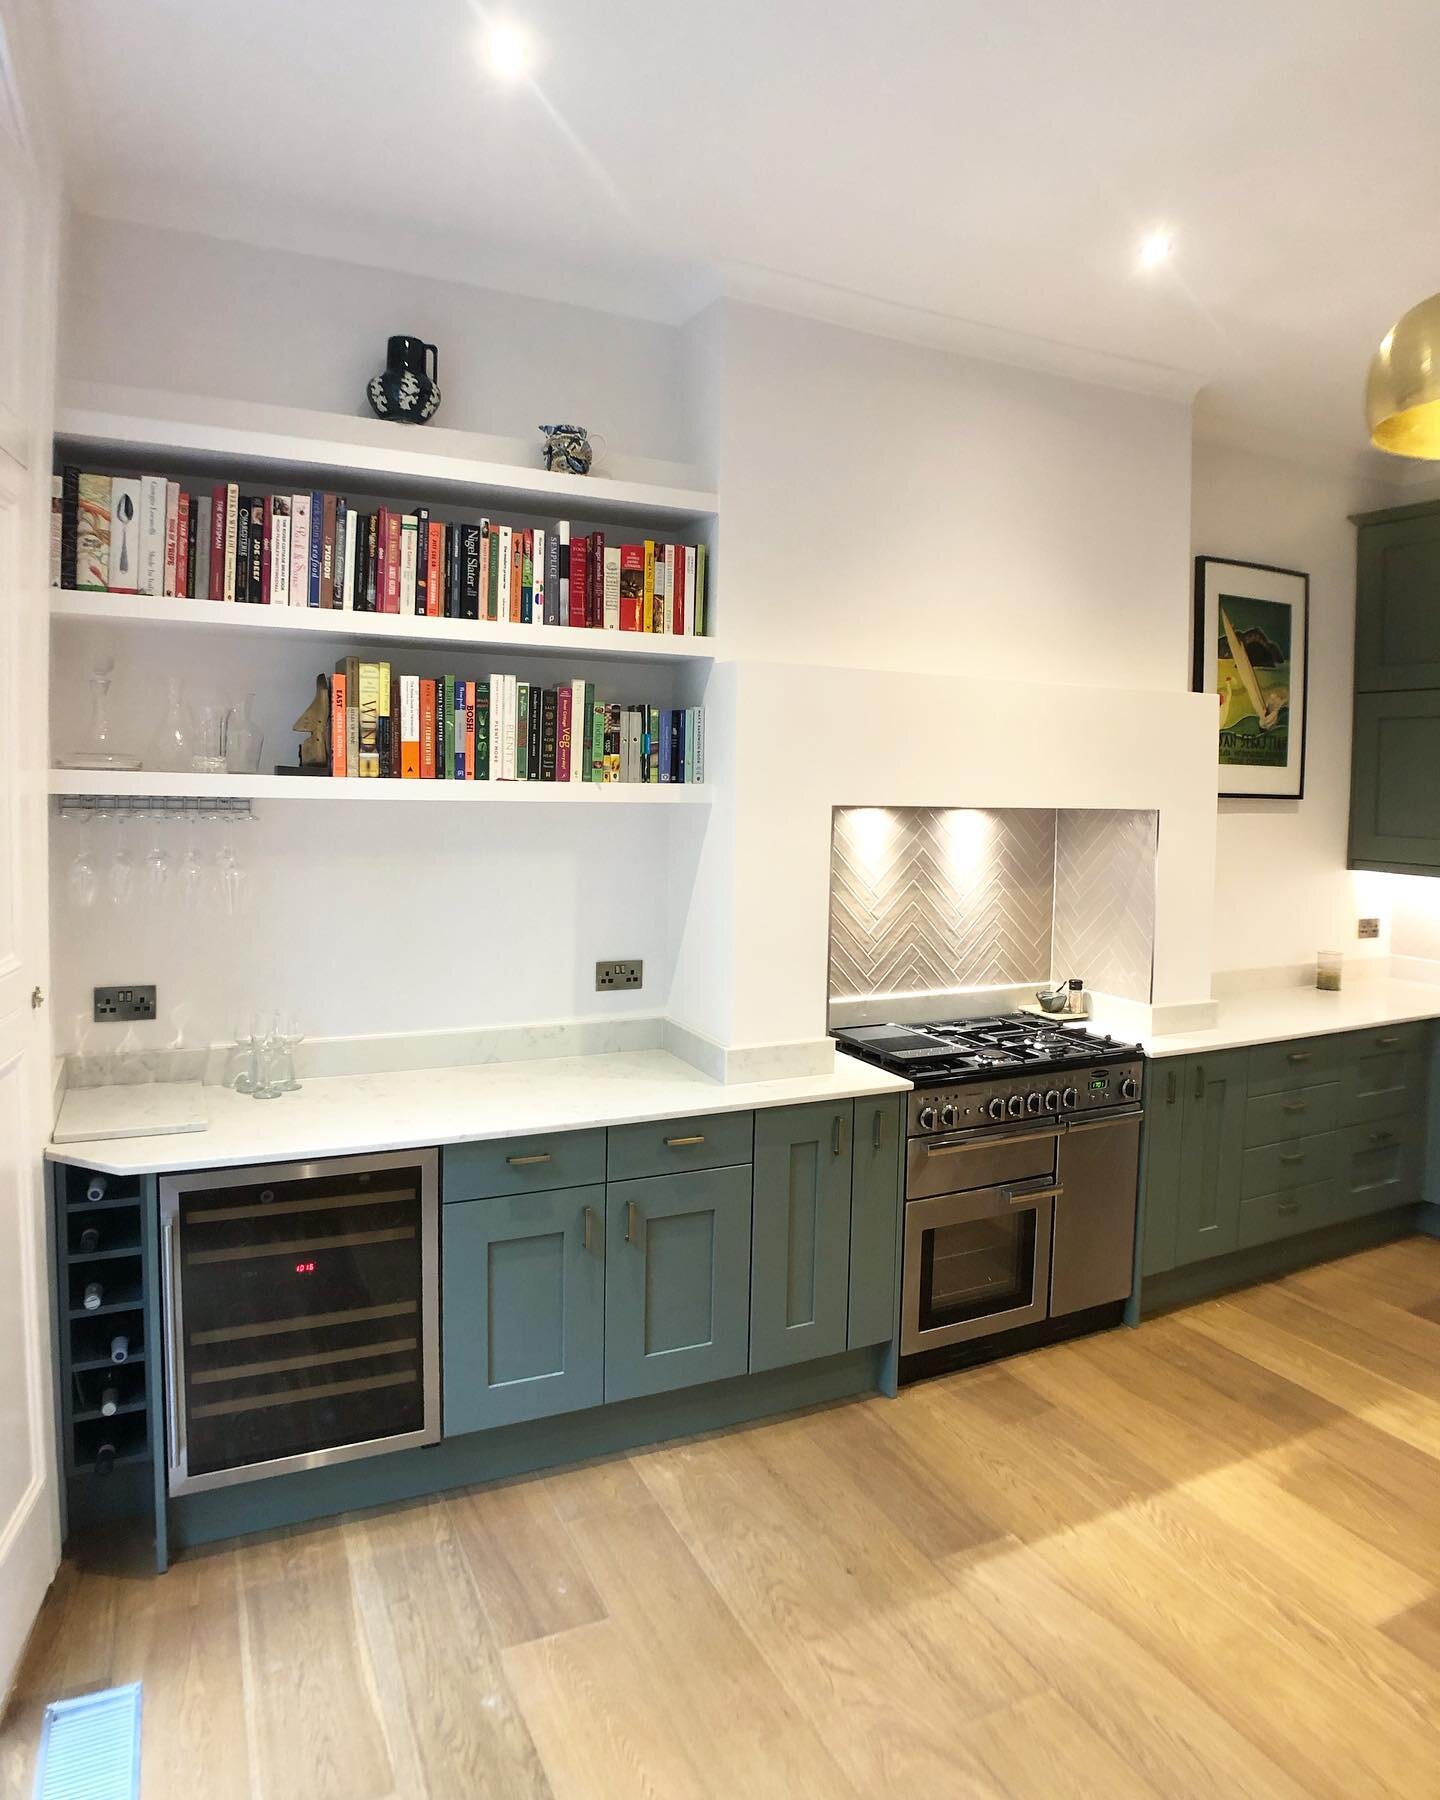 THE LEWISHAM KITCHEN - Returned to this property in #Lewisham to transform the kitchen. This truly was a multi-trade job which threw up plenty of challenges. My clients&rsquo; had their builder rip out the old kitchen, open out the chimney breast and